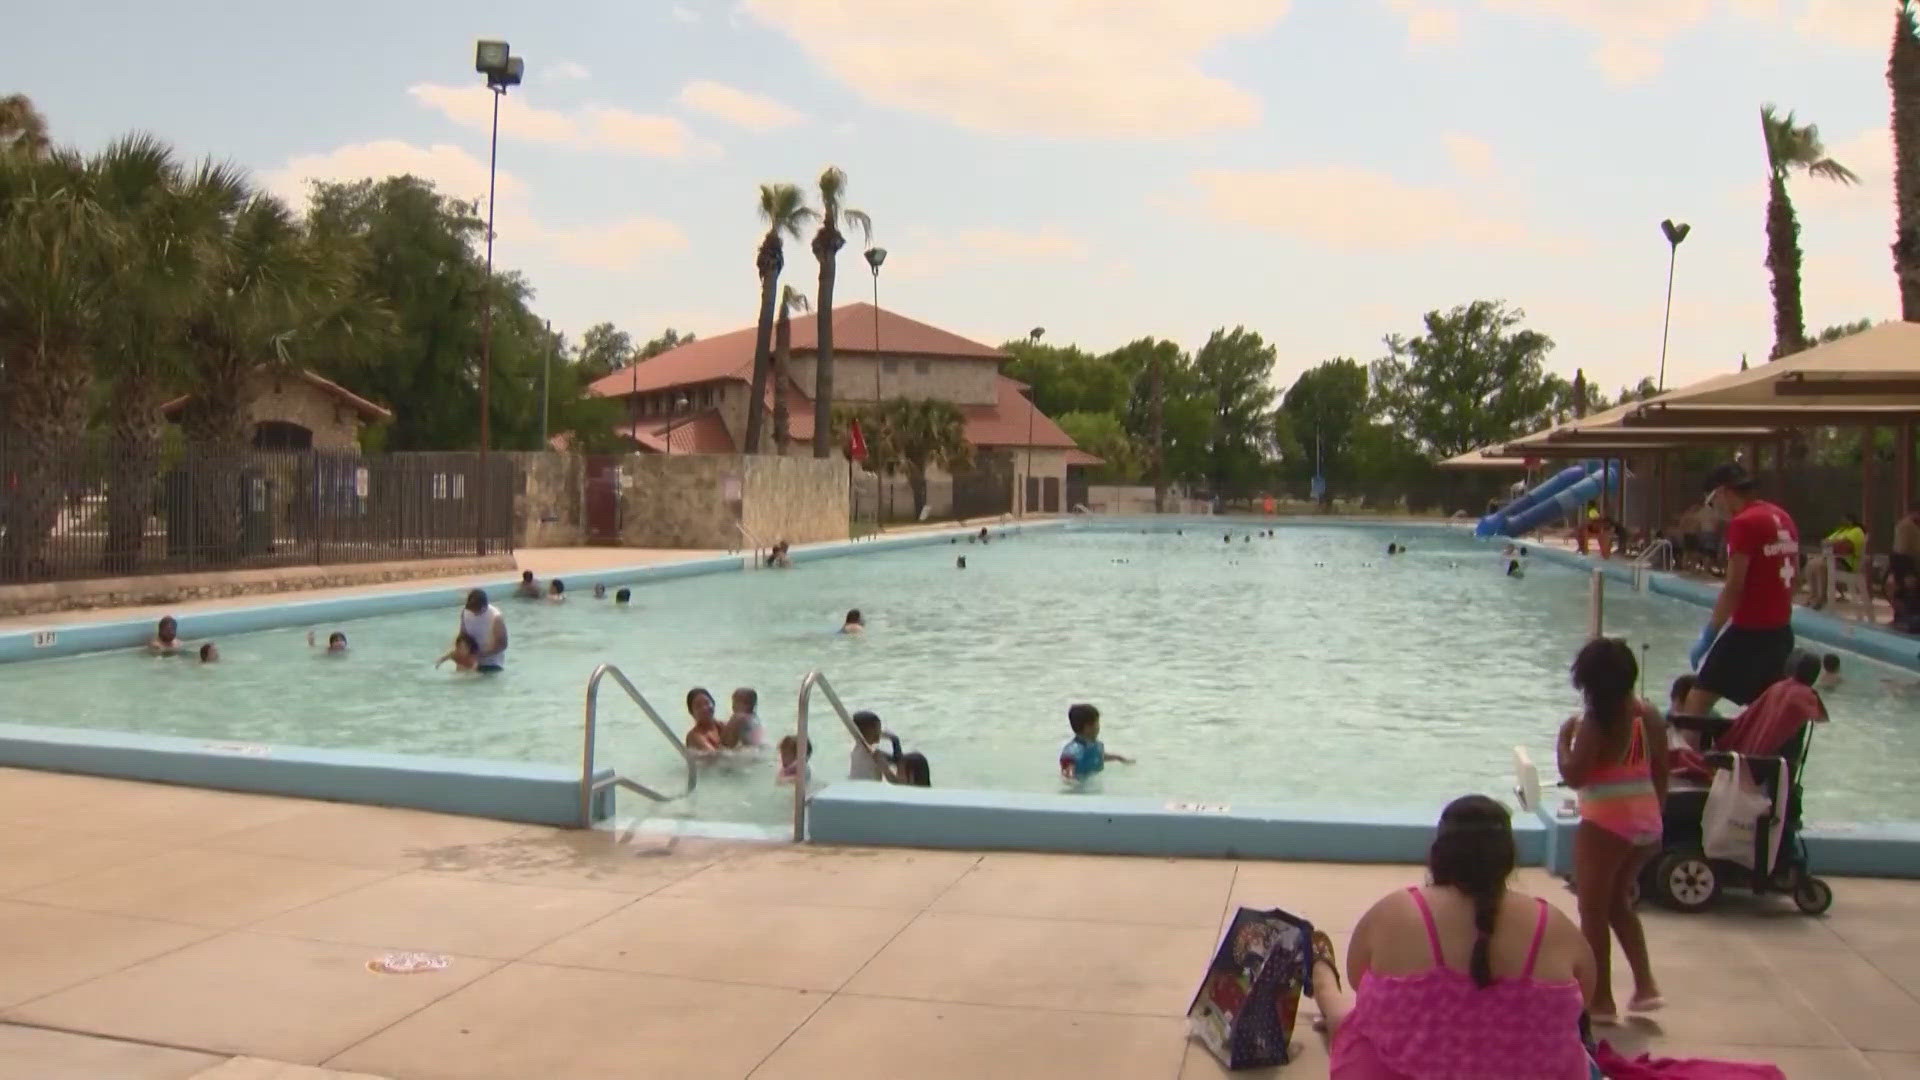 Free swimming lessons back in SA just in time for summer